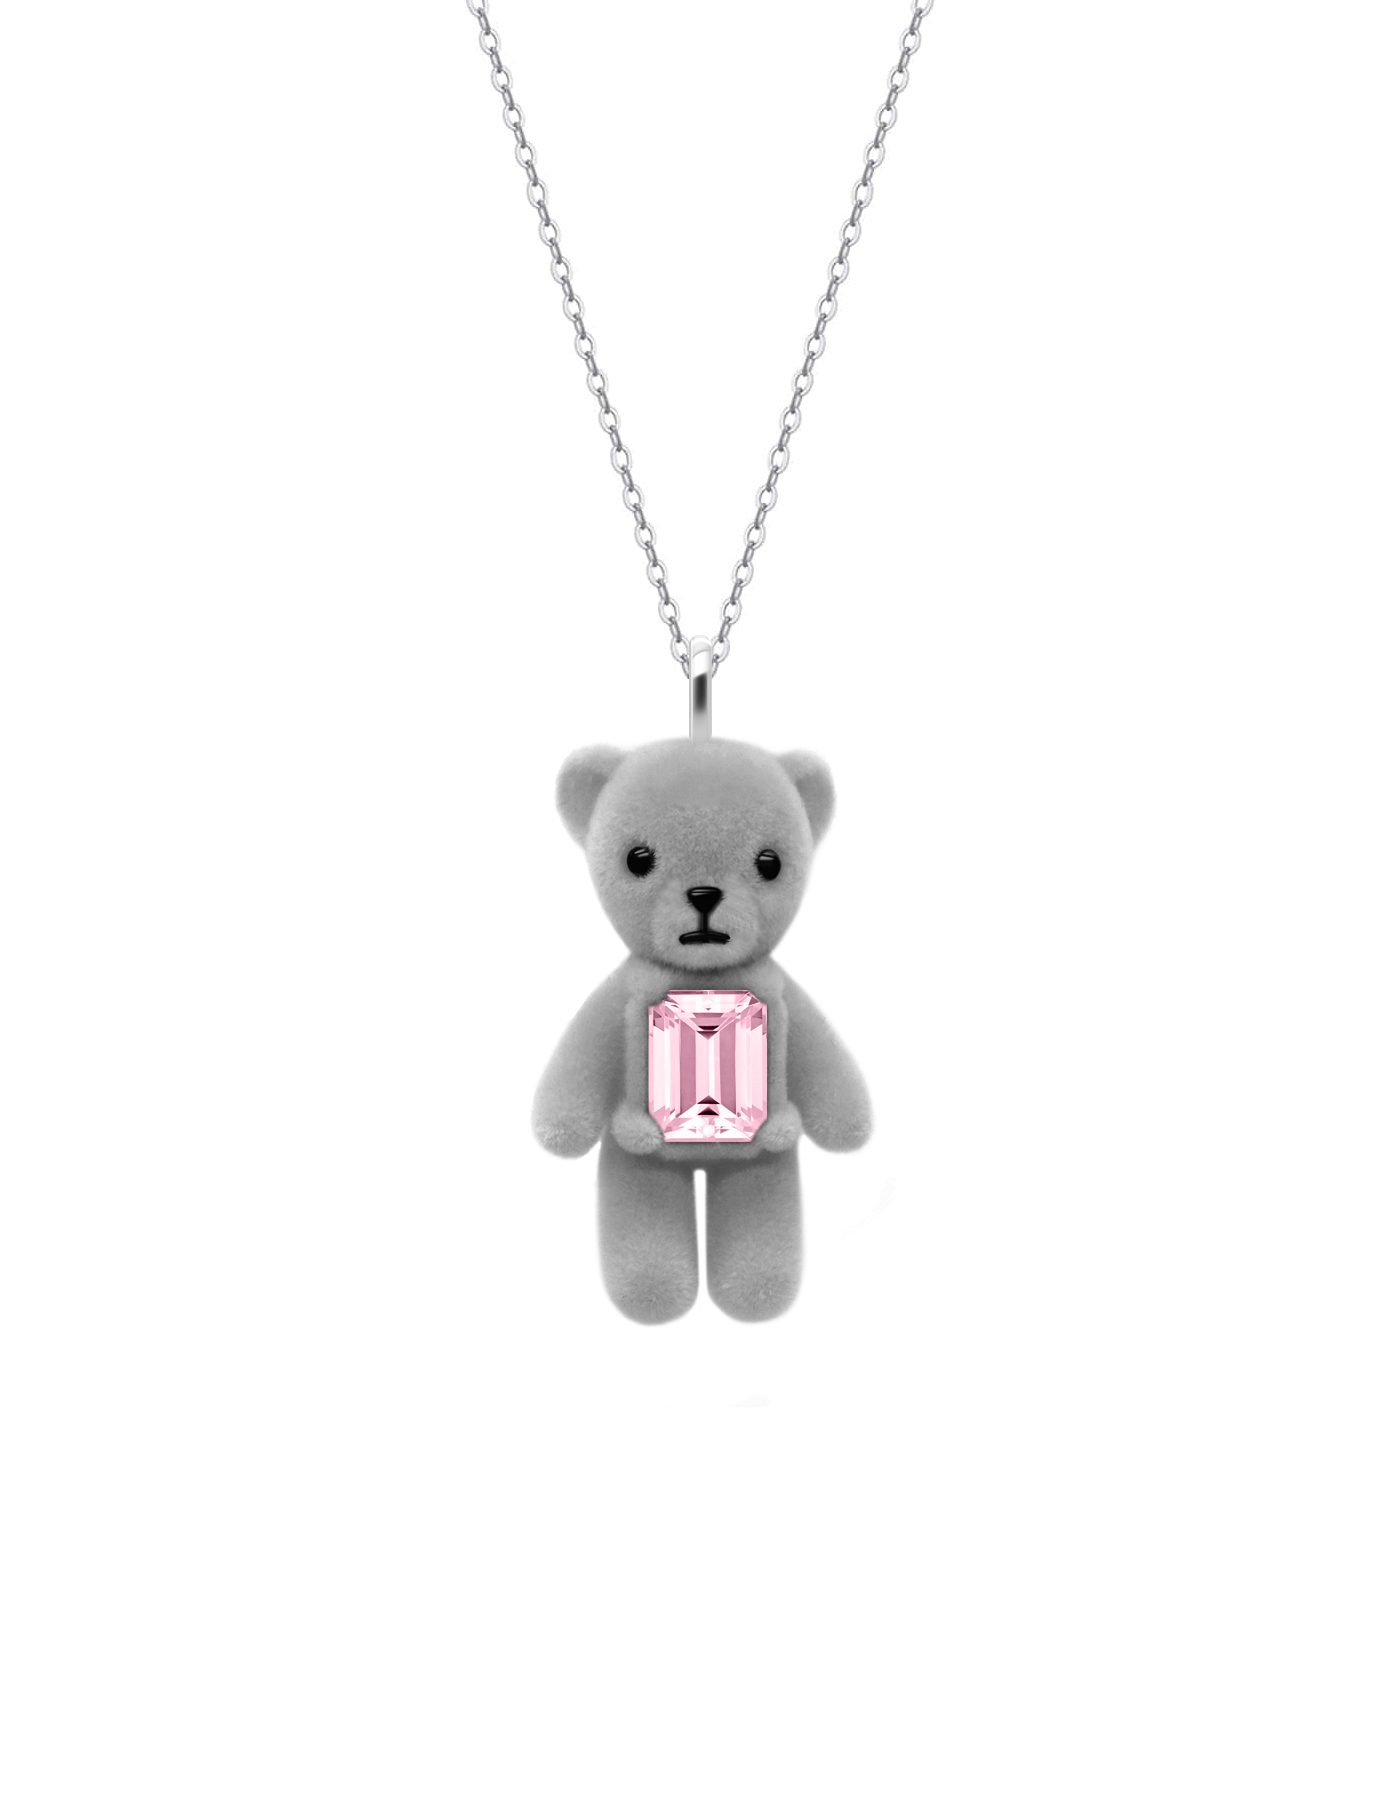 TEO necklace (GRAY)